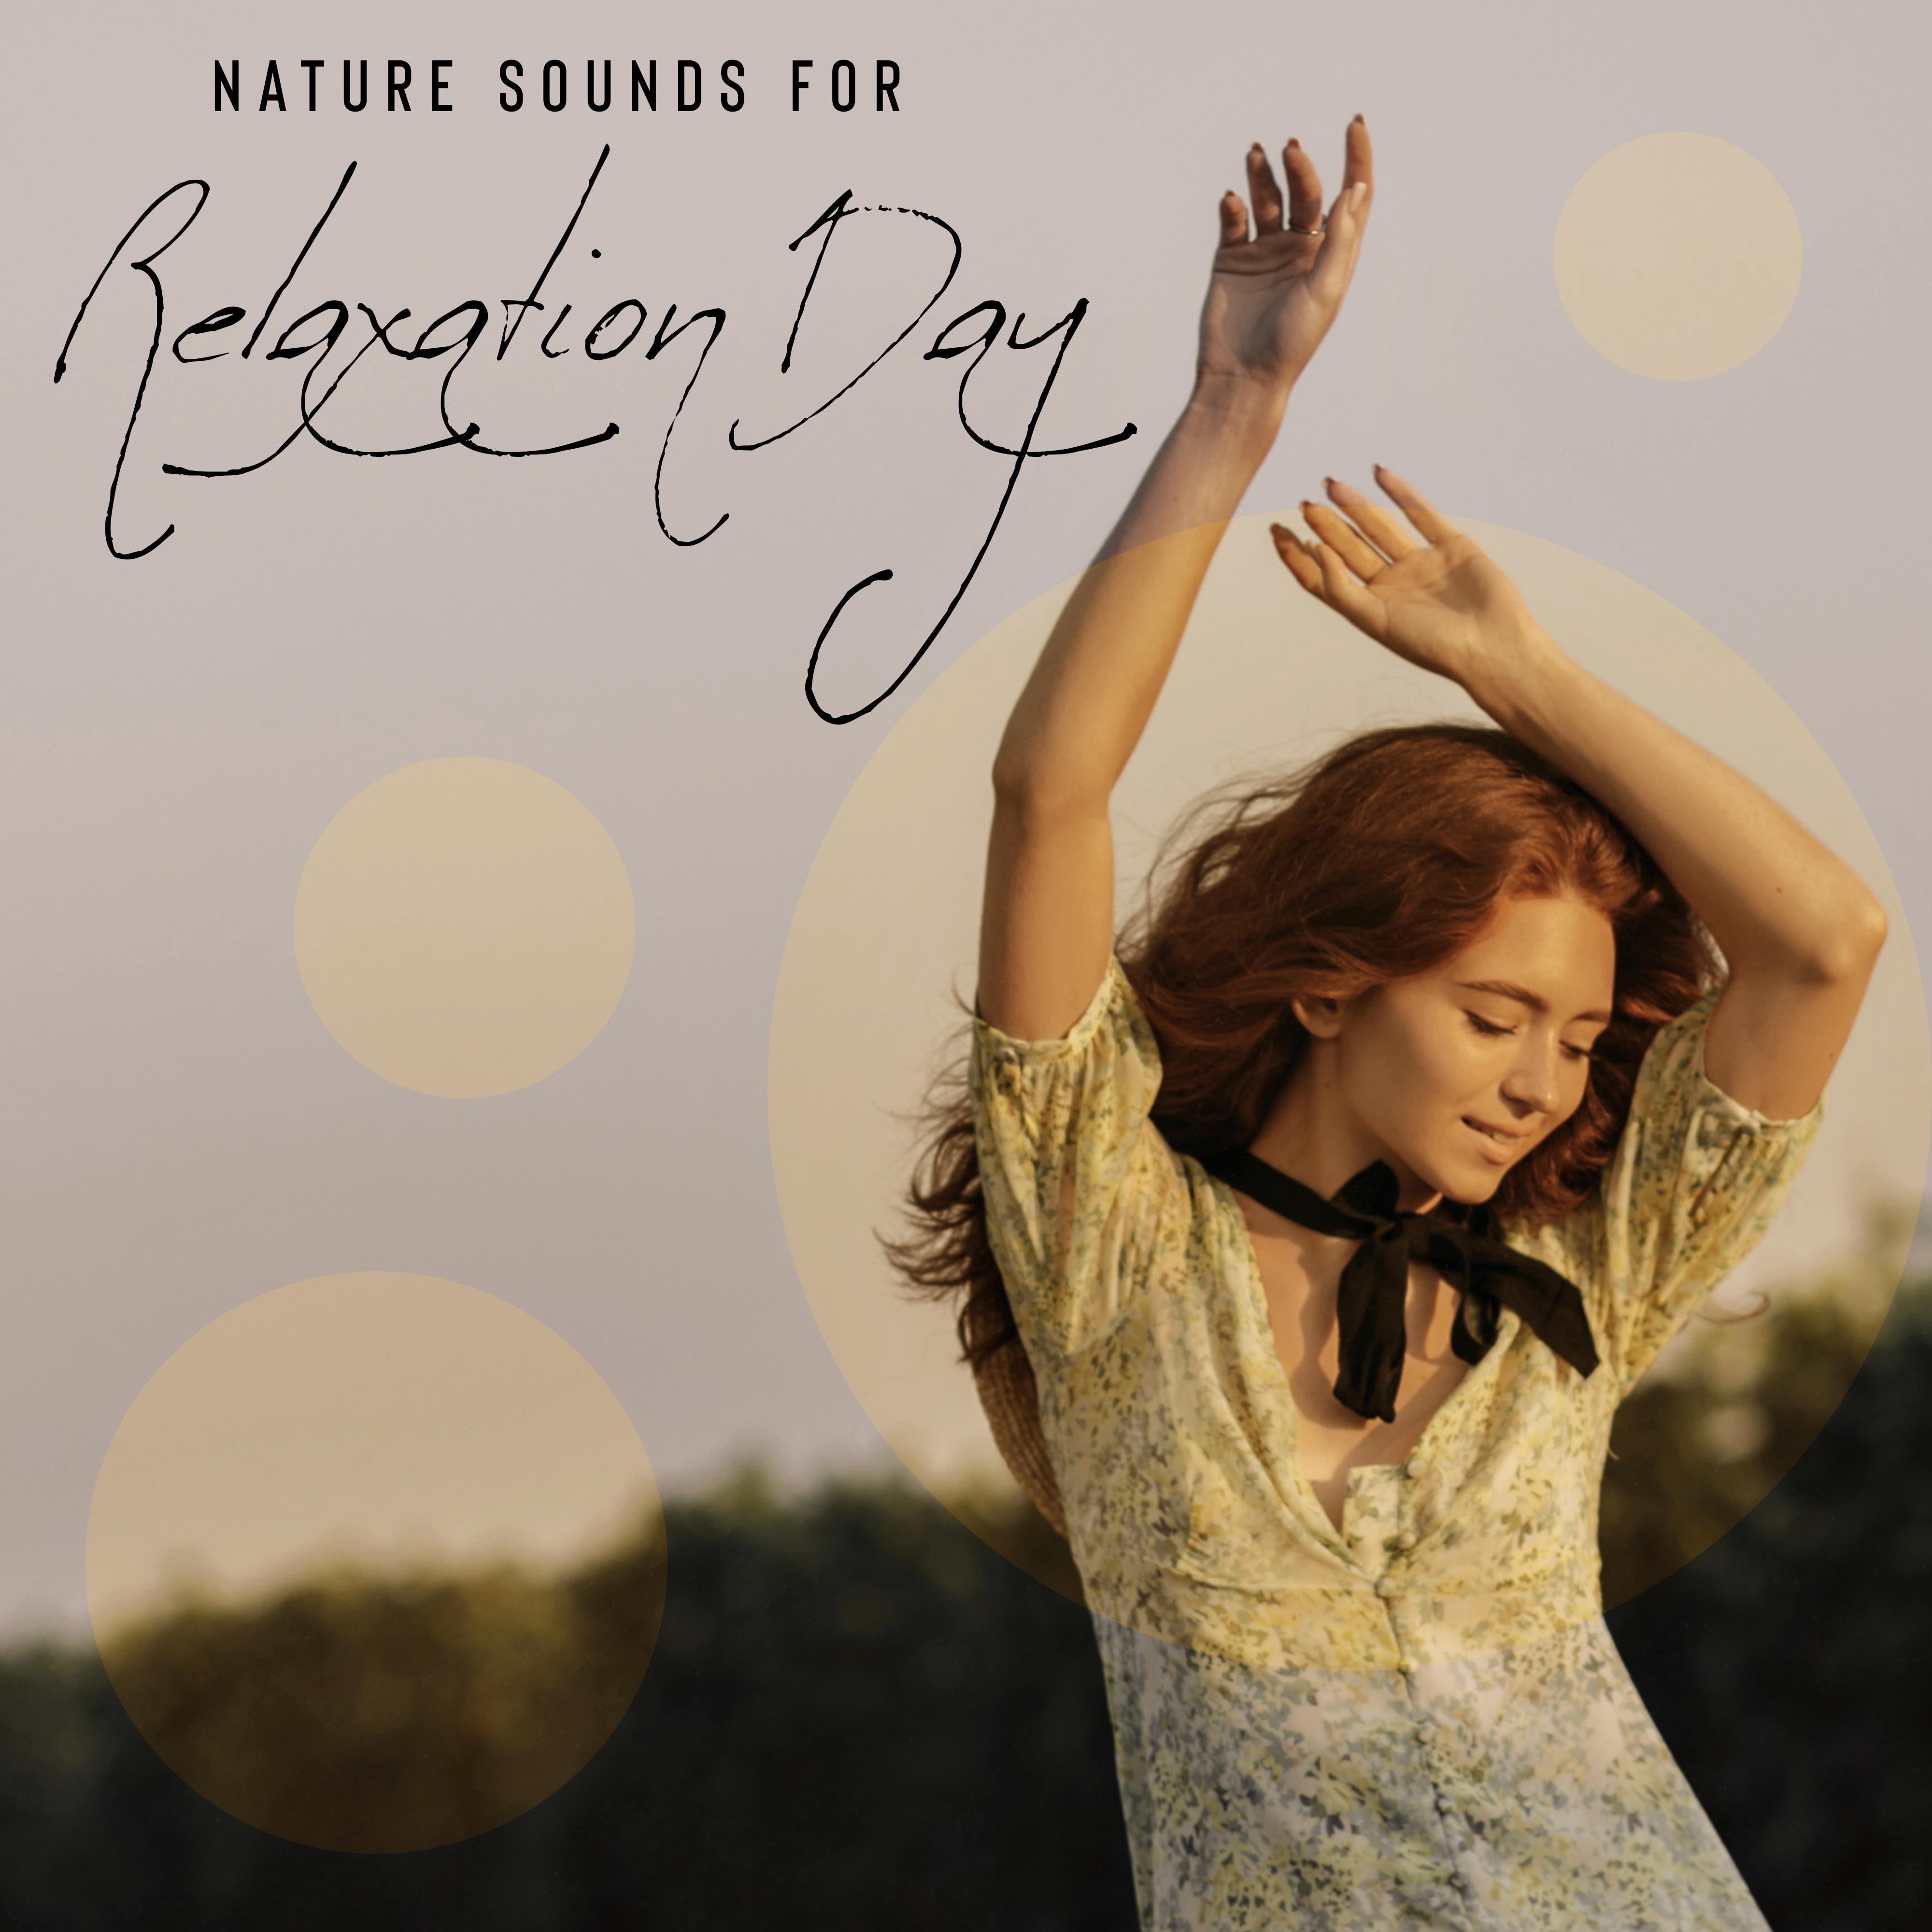 Nature Sounds for Relaxation Day – Ambient Natural Music for Total Mental Rest